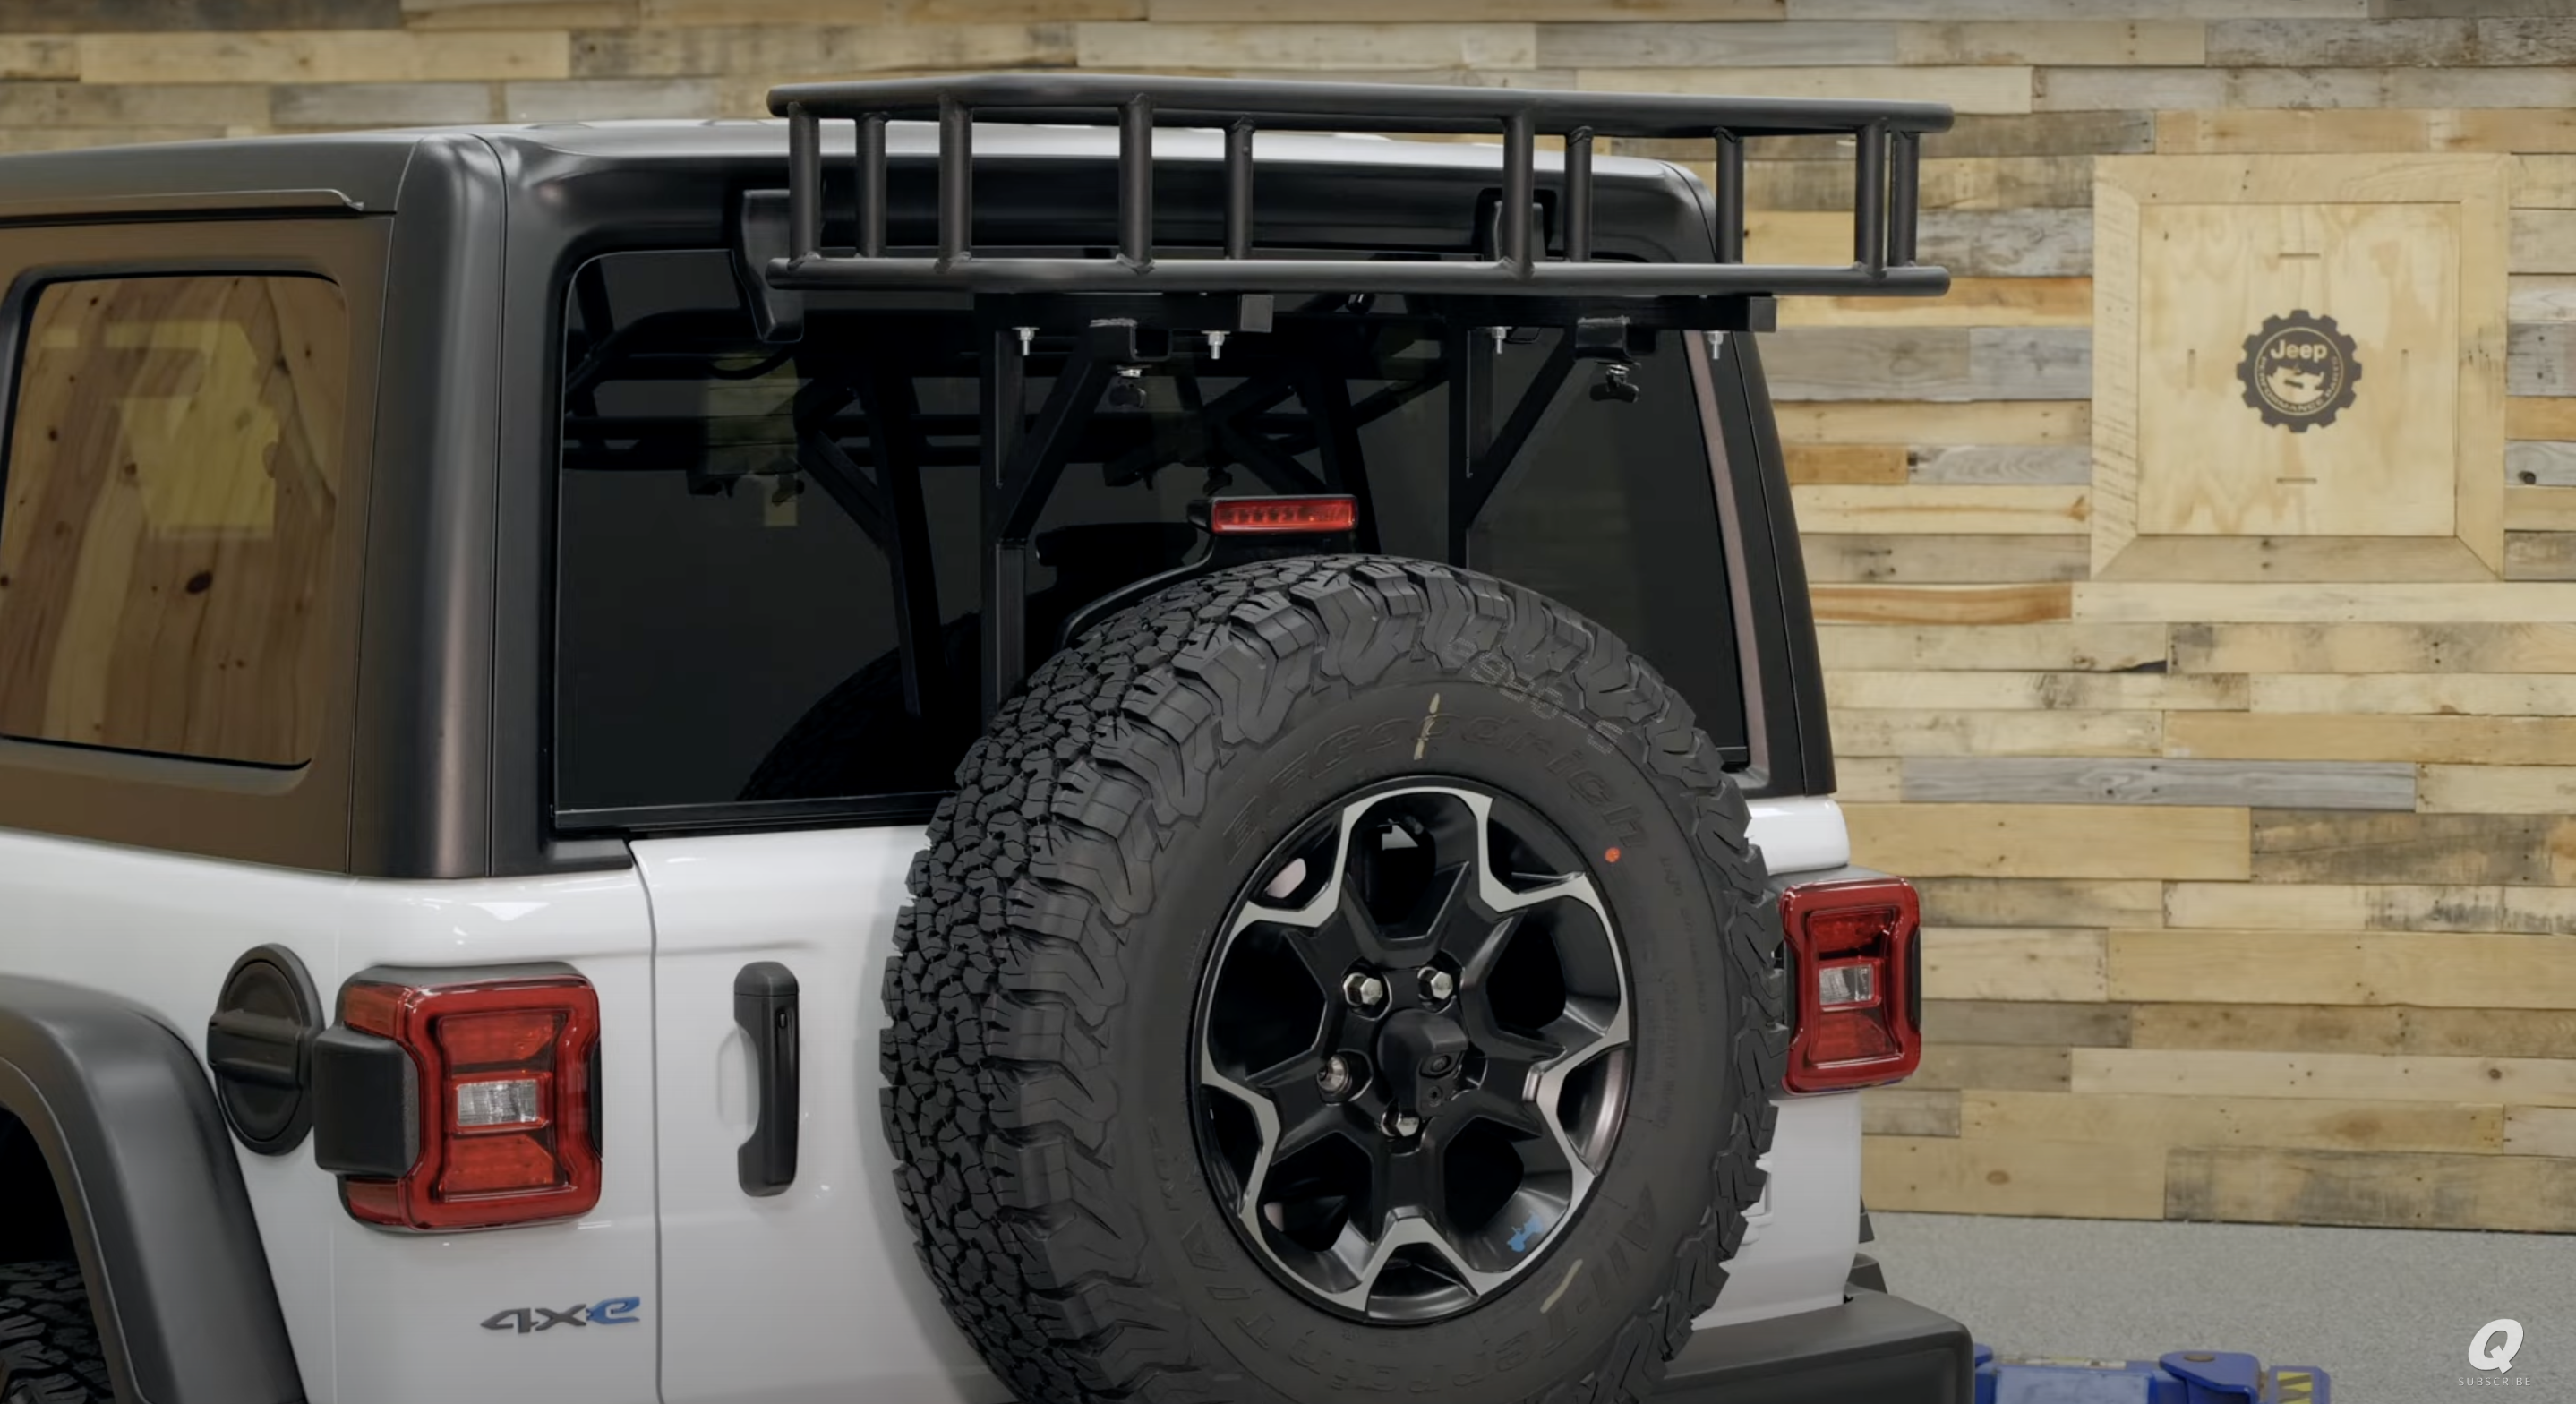 Wrangler Gets Tailgate Makeover with Paramount Auto's Cargo Carrier